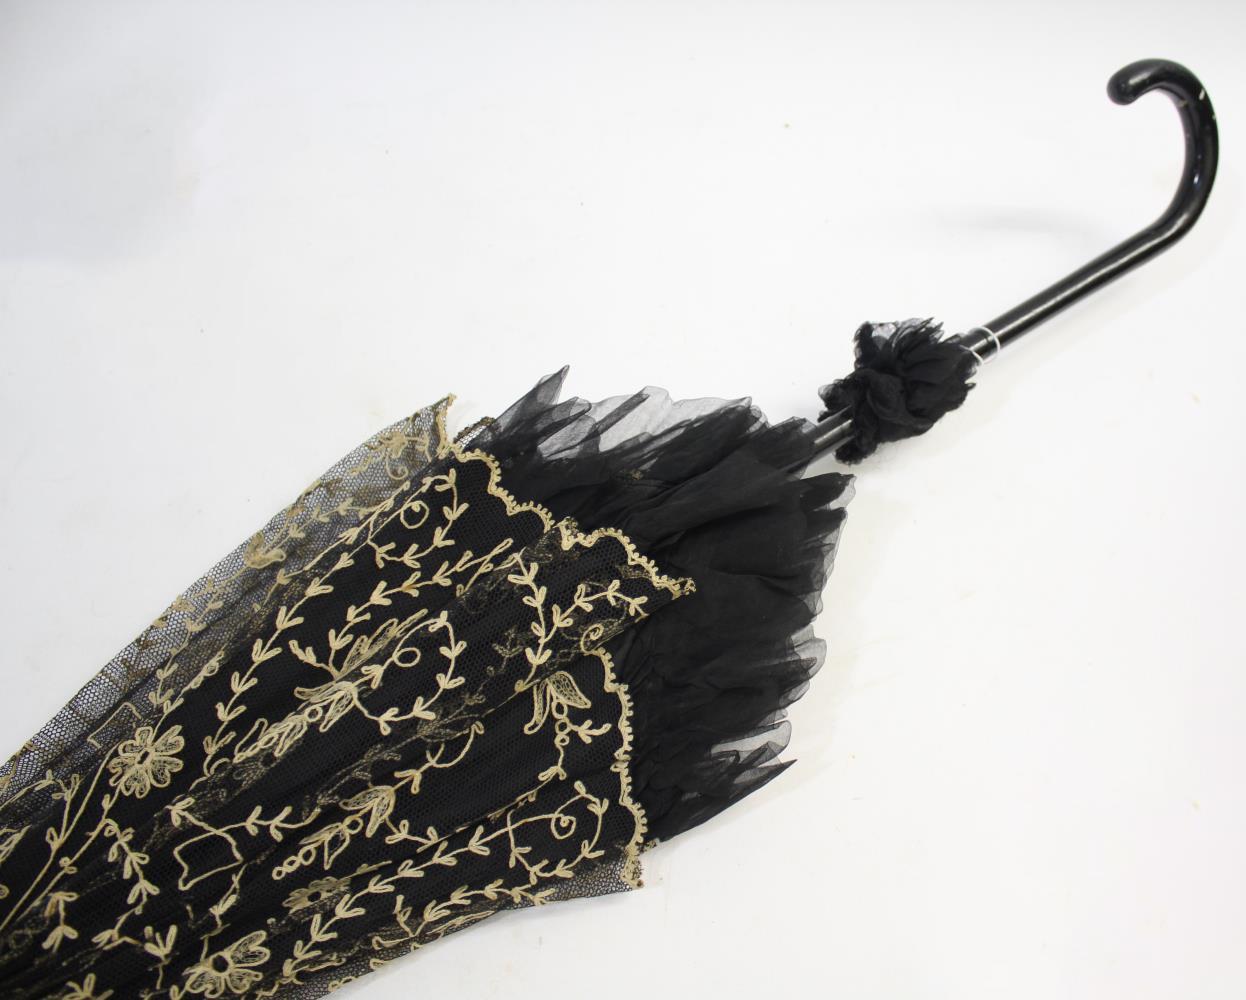 VICTORIAN LACE PARASOL a black and cream silk parasol with a wooden handle.